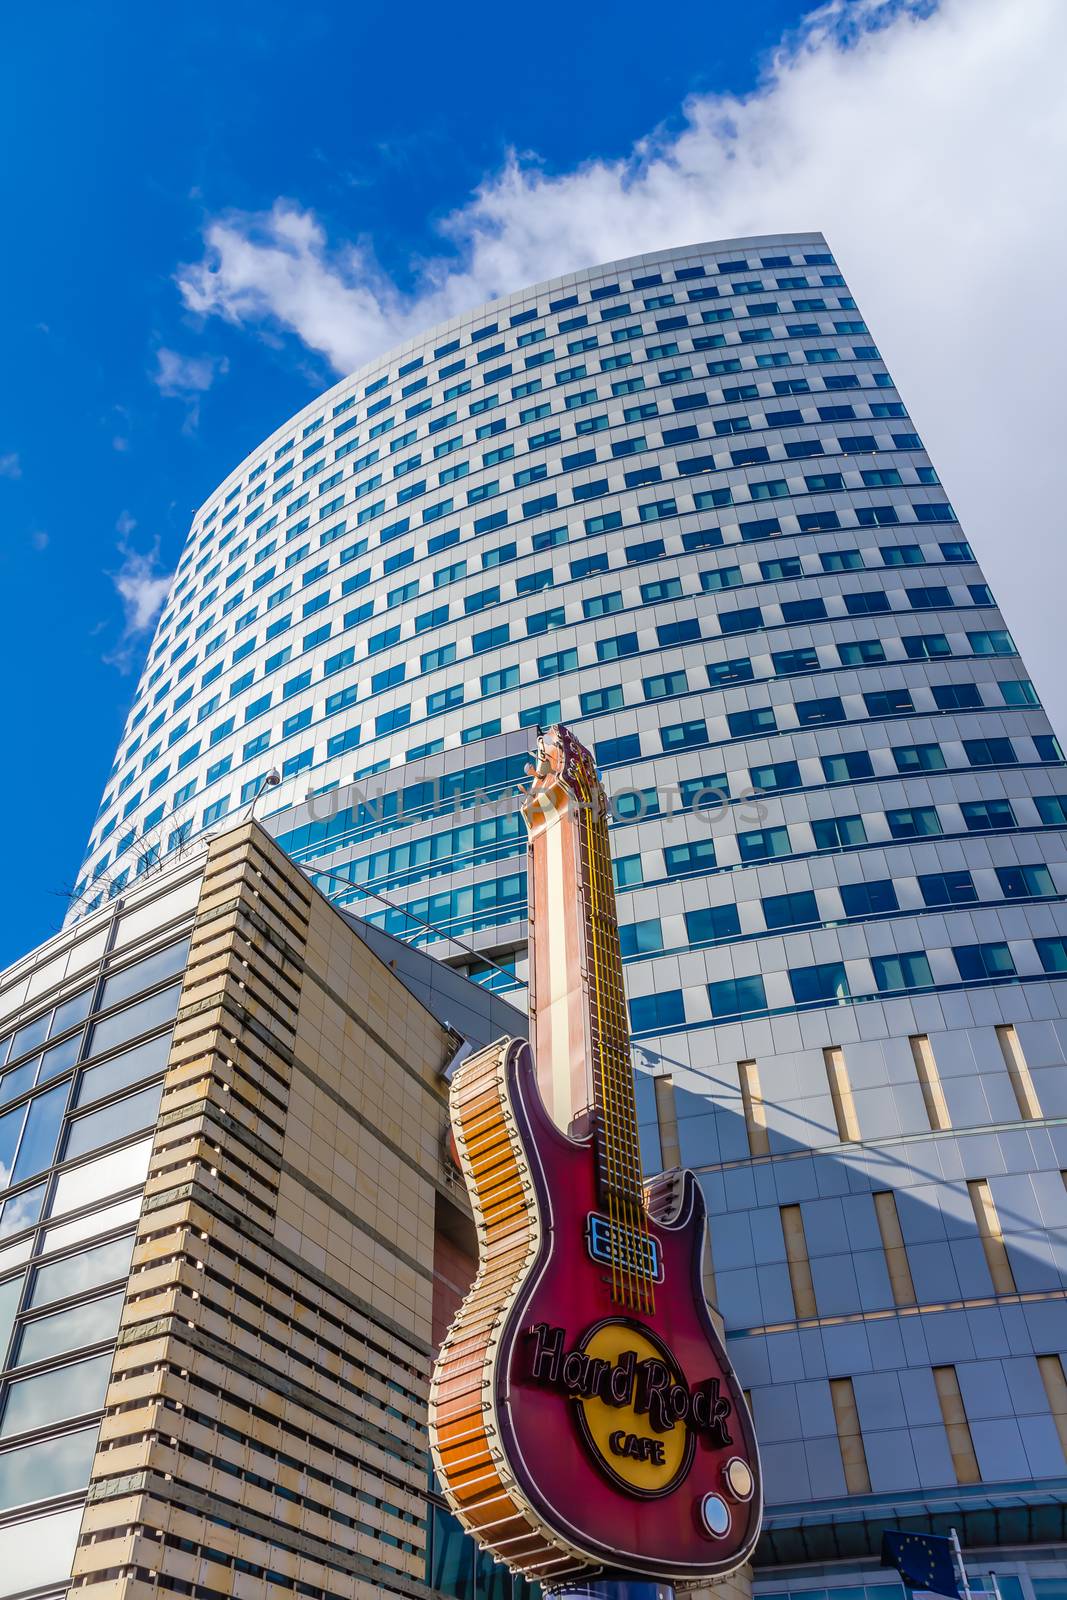 Golden Terraces in Warsaw, commercial and entertainment complex, on March 01, 2013. In the foreground  guitar, legendary symbol of Hard Rock Café which is situated at the street level.